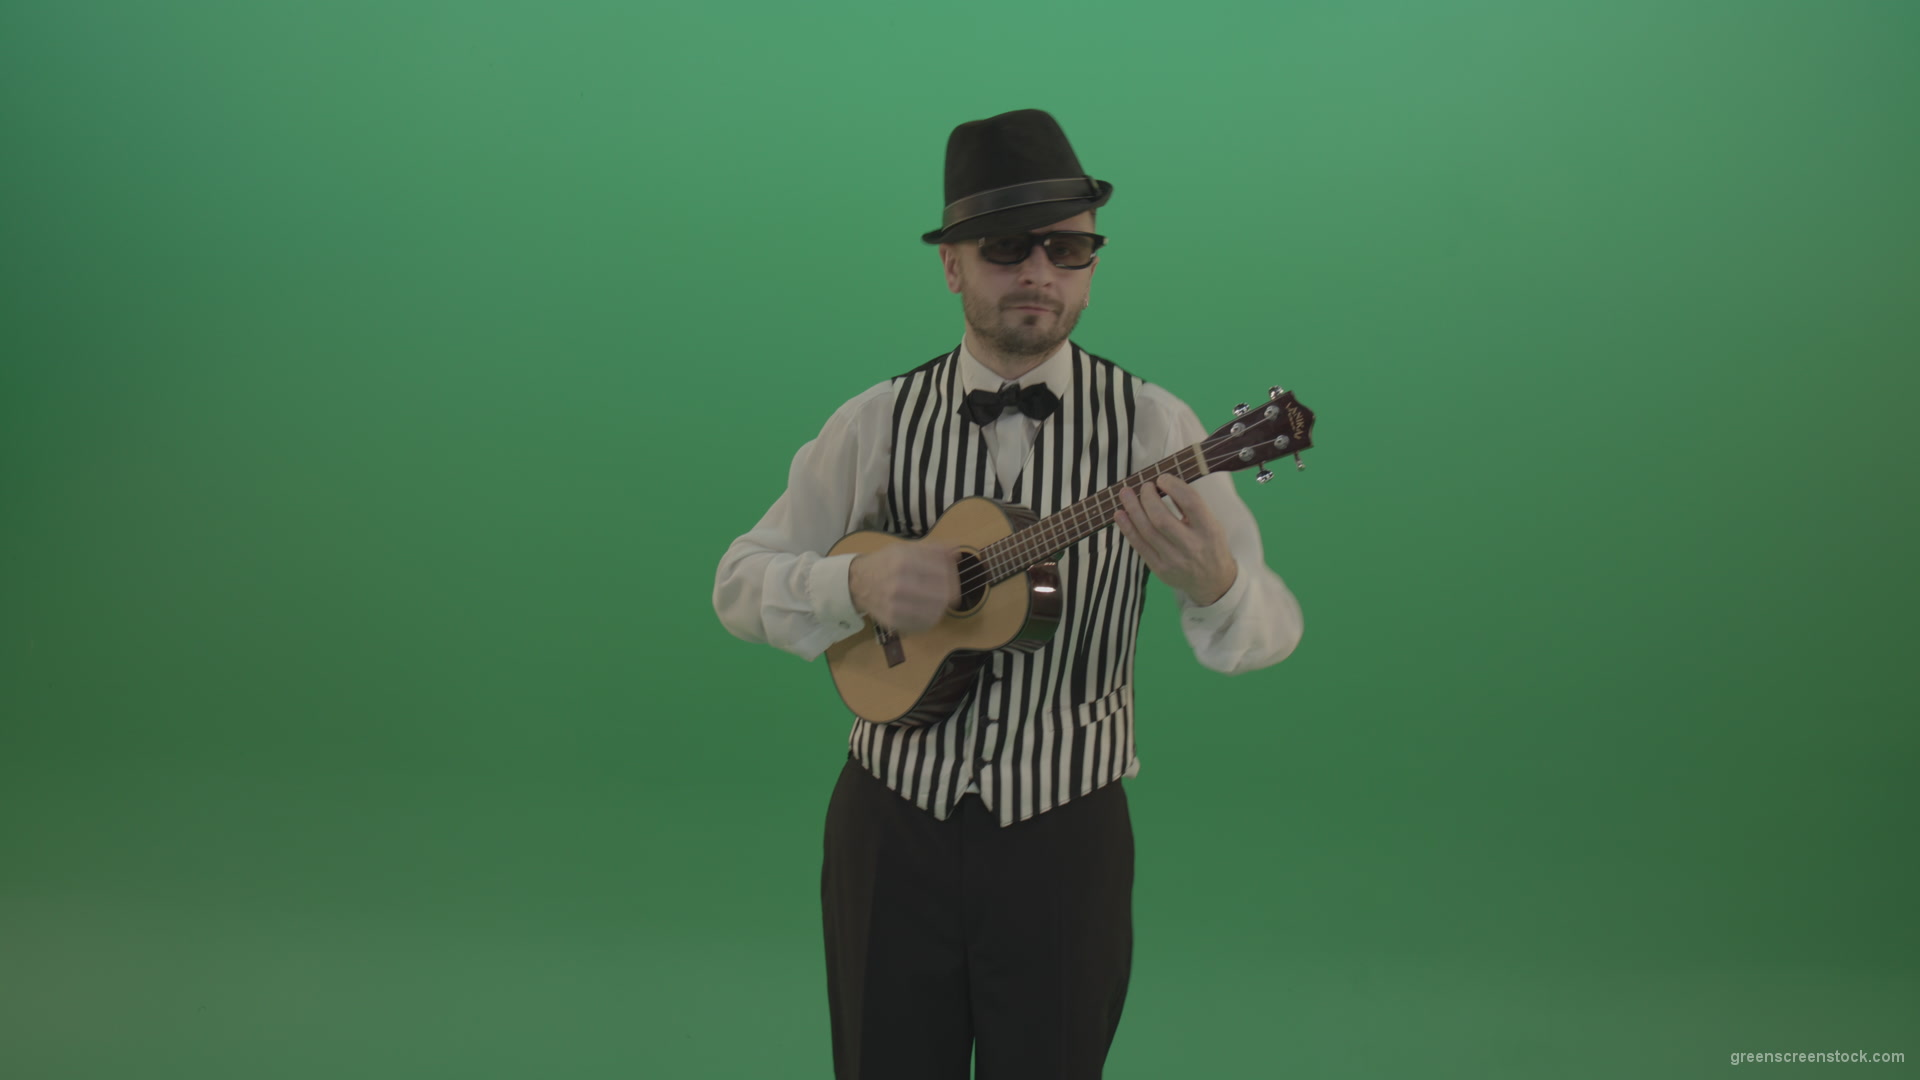 Funny-guitar-player-with-small-classic-guitar-on-chromakey-green-screen_006 Green Screen Stock